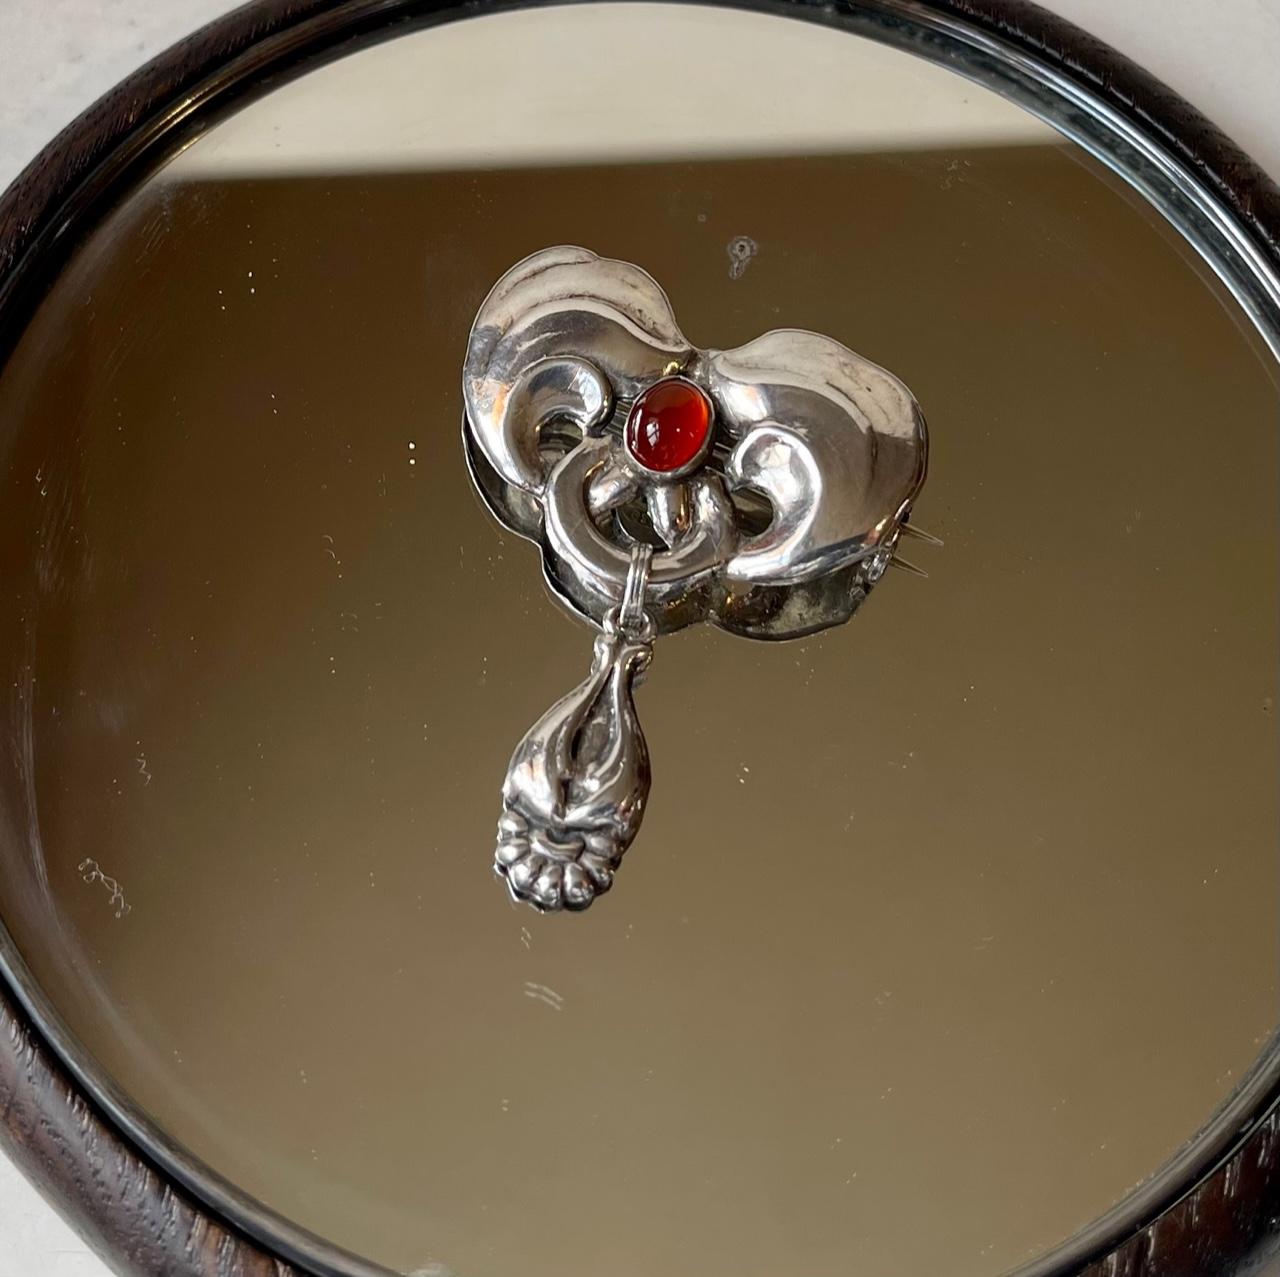 Period Jugend silver brooch set with a deep red garnet stone in cabochon. Large size with two sections attached with a hoop. Markings: 826, S, BH (Bernhard Hertz). Measurements: H: 50 mm, W: 40 mm.

The Hertz workshop in Copenhagen were closely